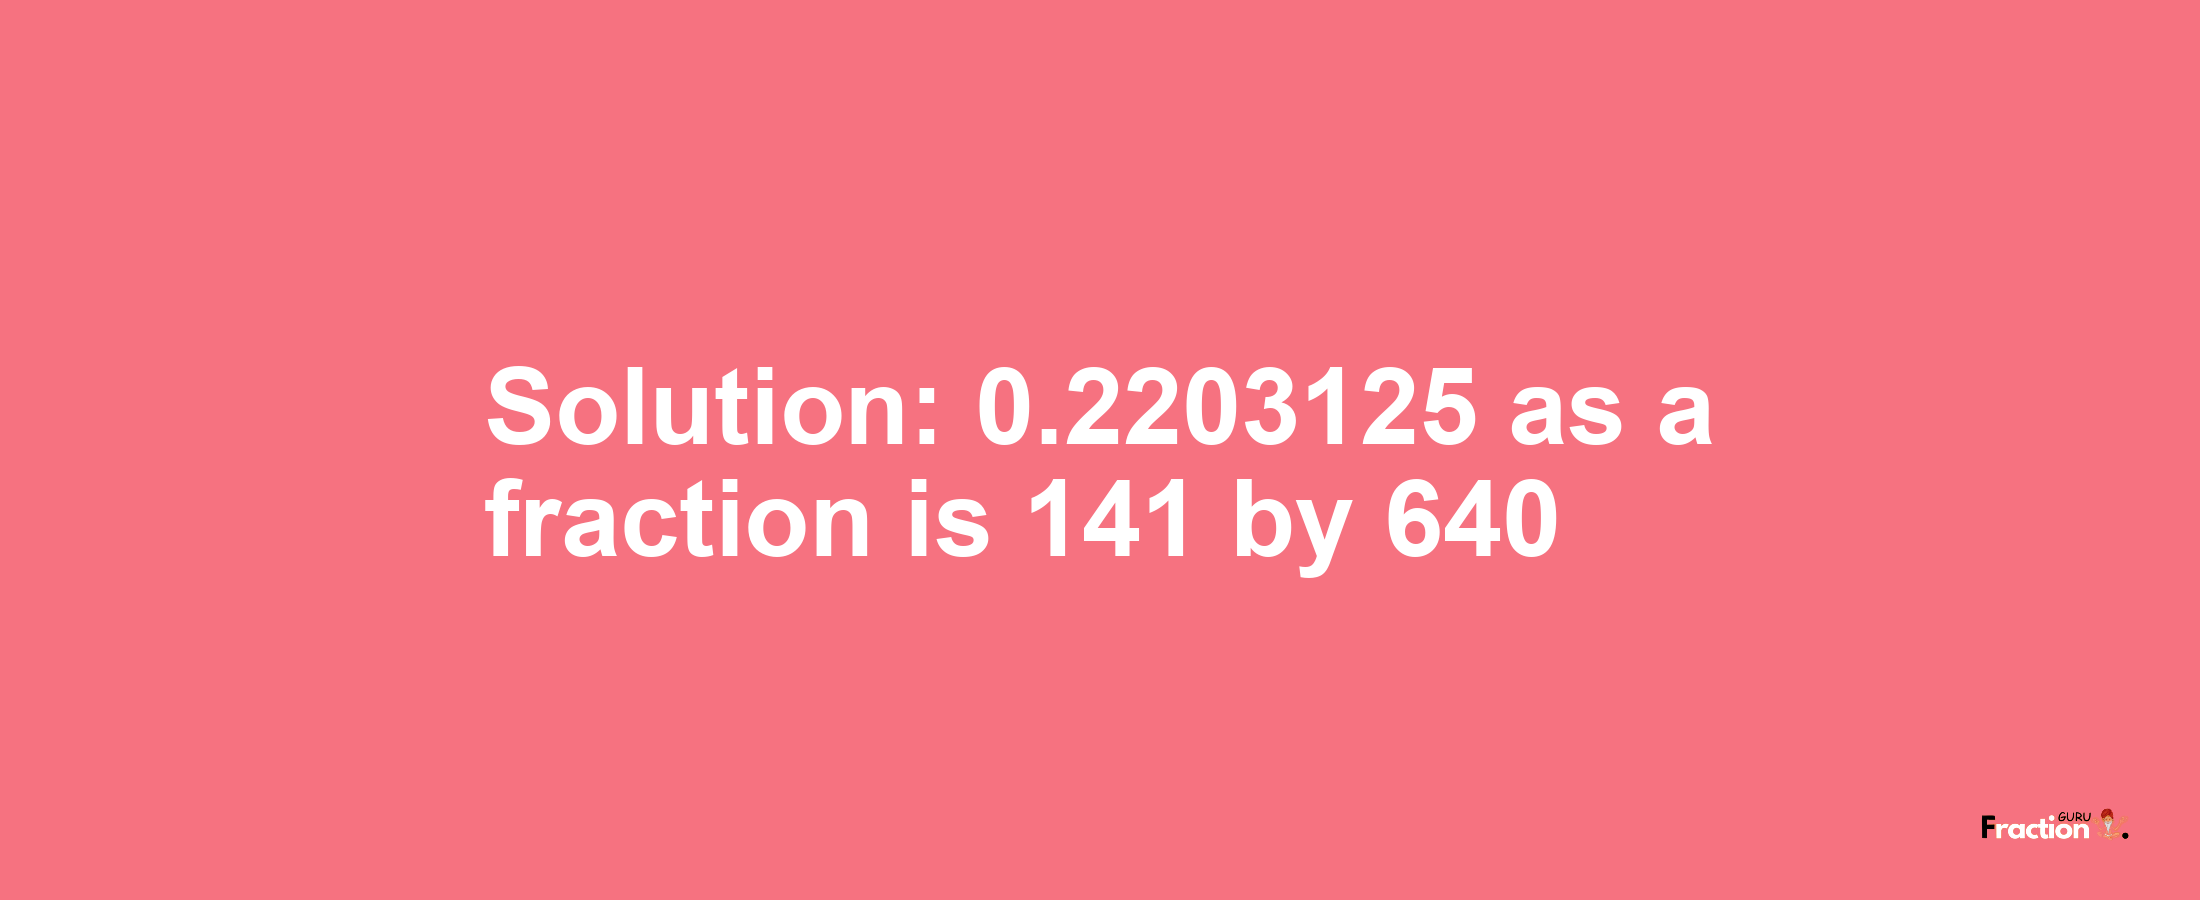 Solution:0.2203125 as a fraction is 141/640